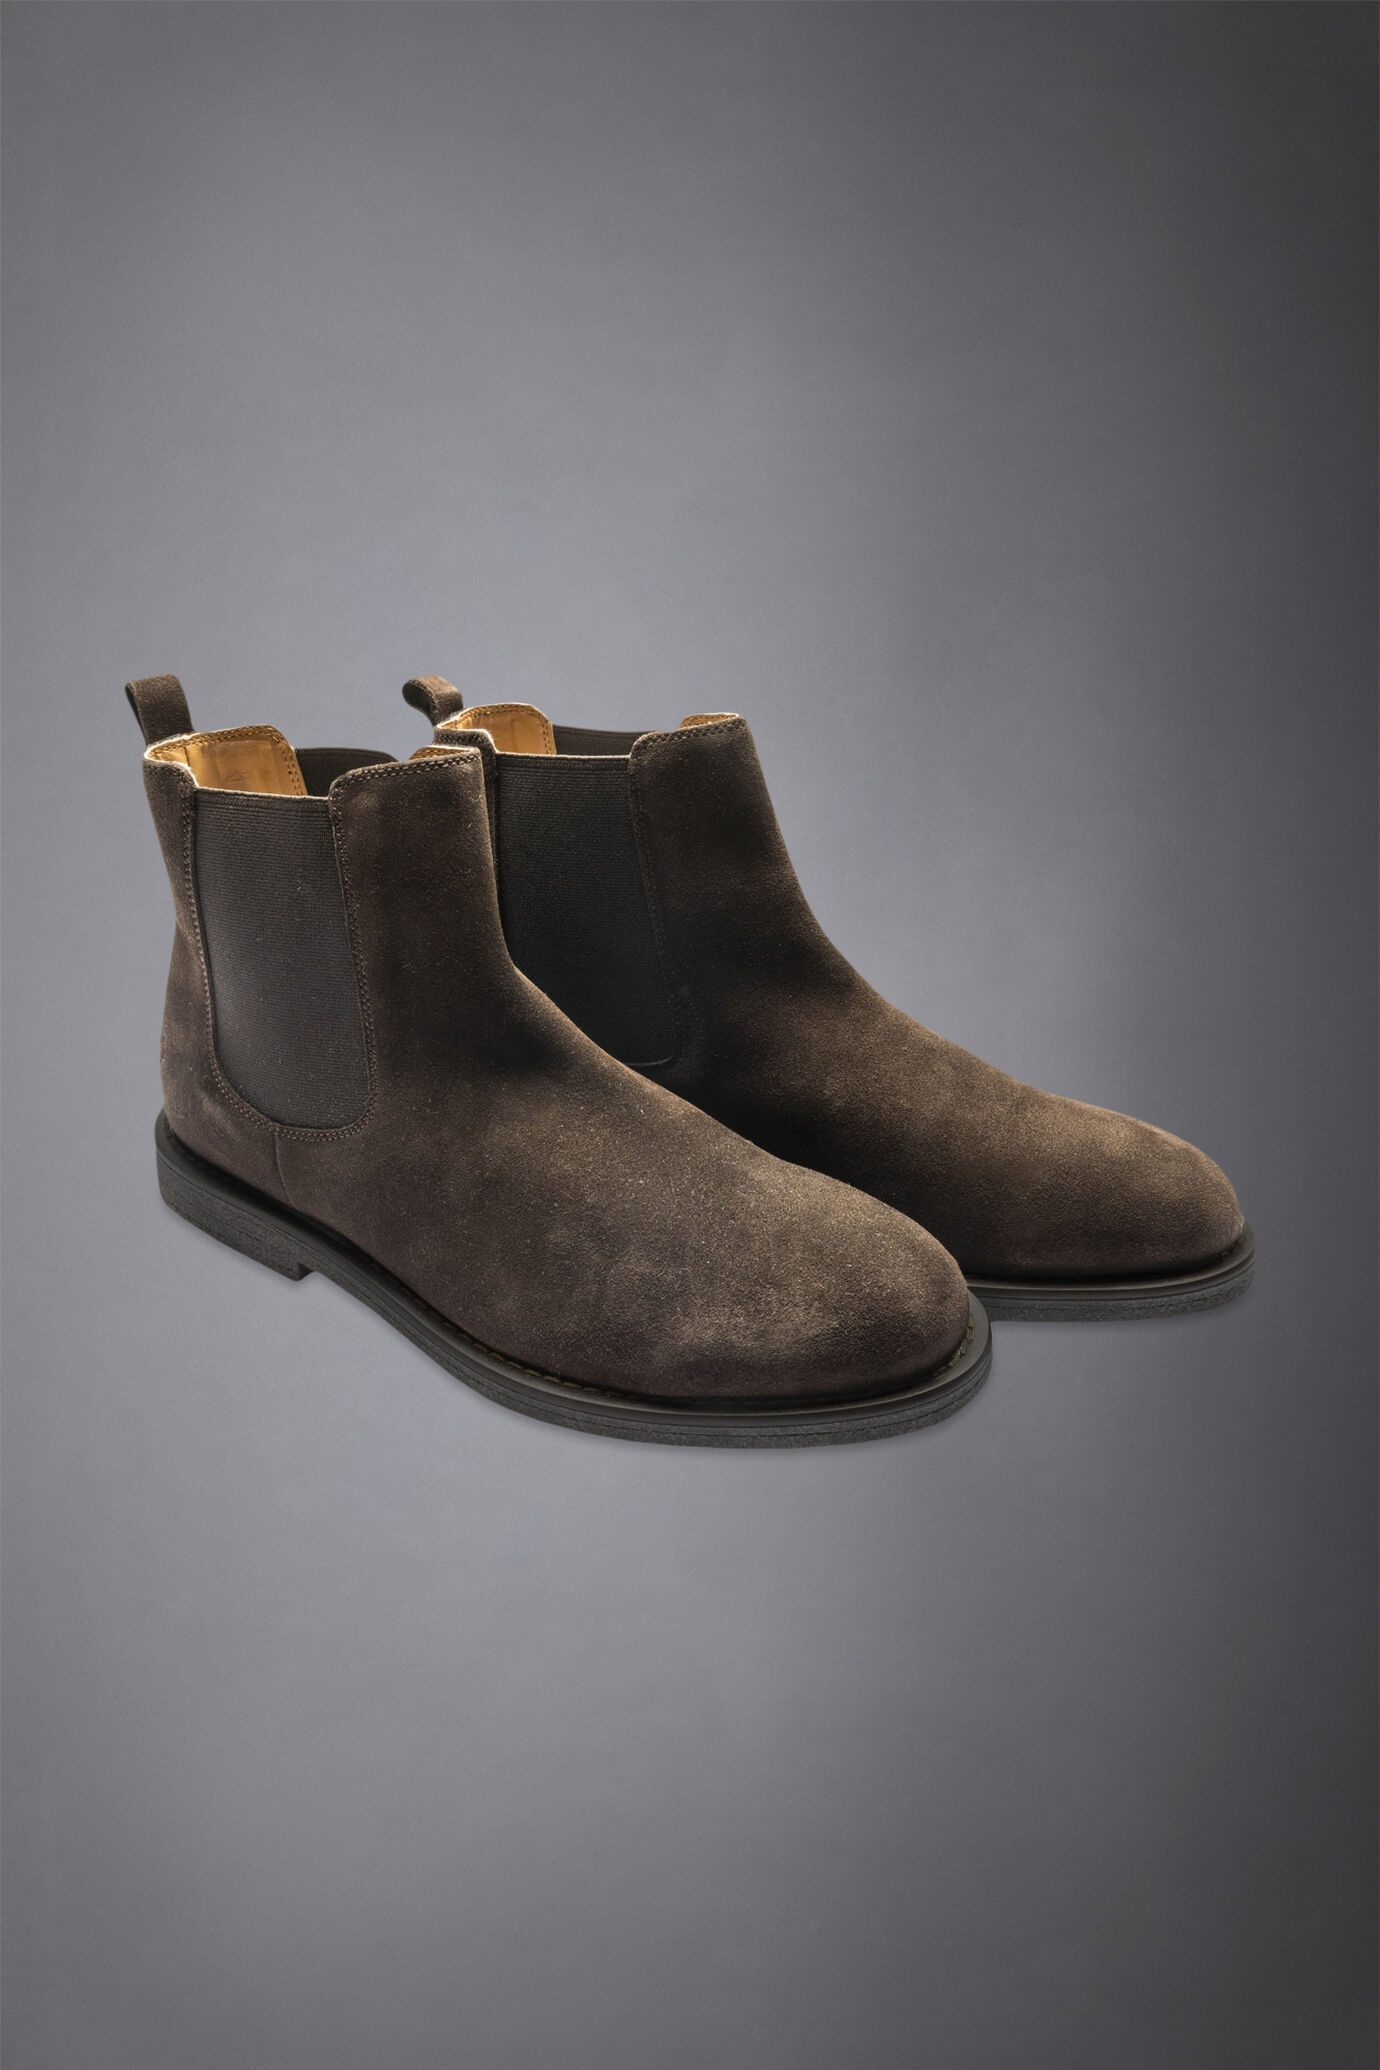 Men's chelsea boots 100% suede with rubber sole